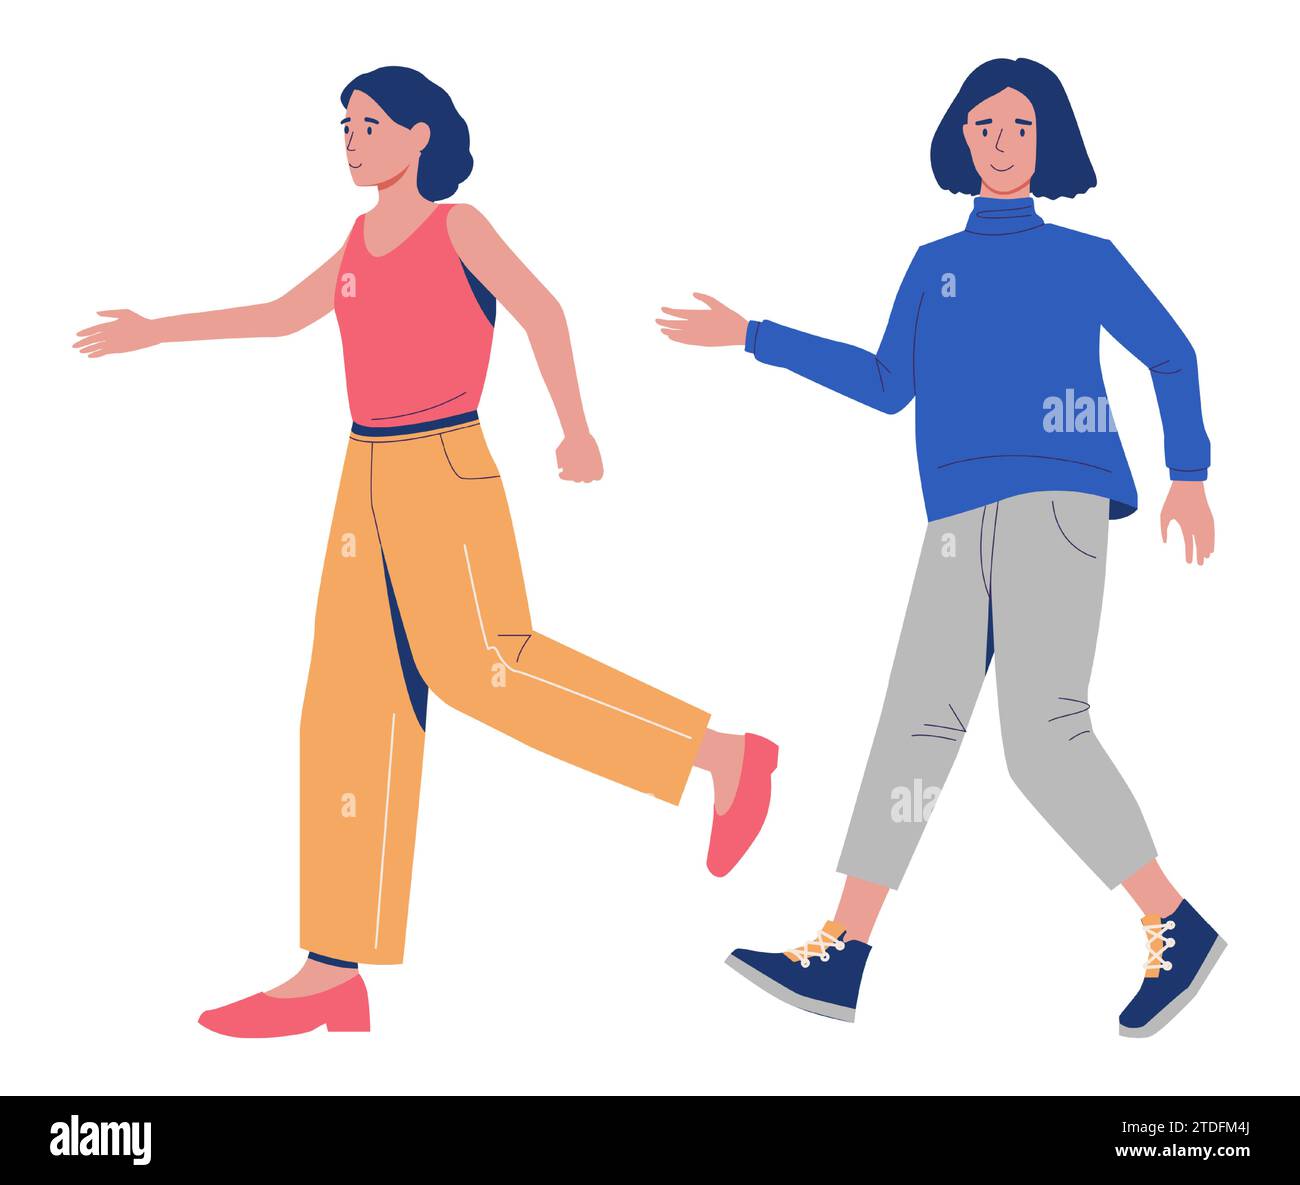 Creative women. Happy girls walking. Casual summer outfit. Smiling persons in sweater or T-shirt. Trendy jeans trousers. Hand waving gesture. Garment Stock Vector